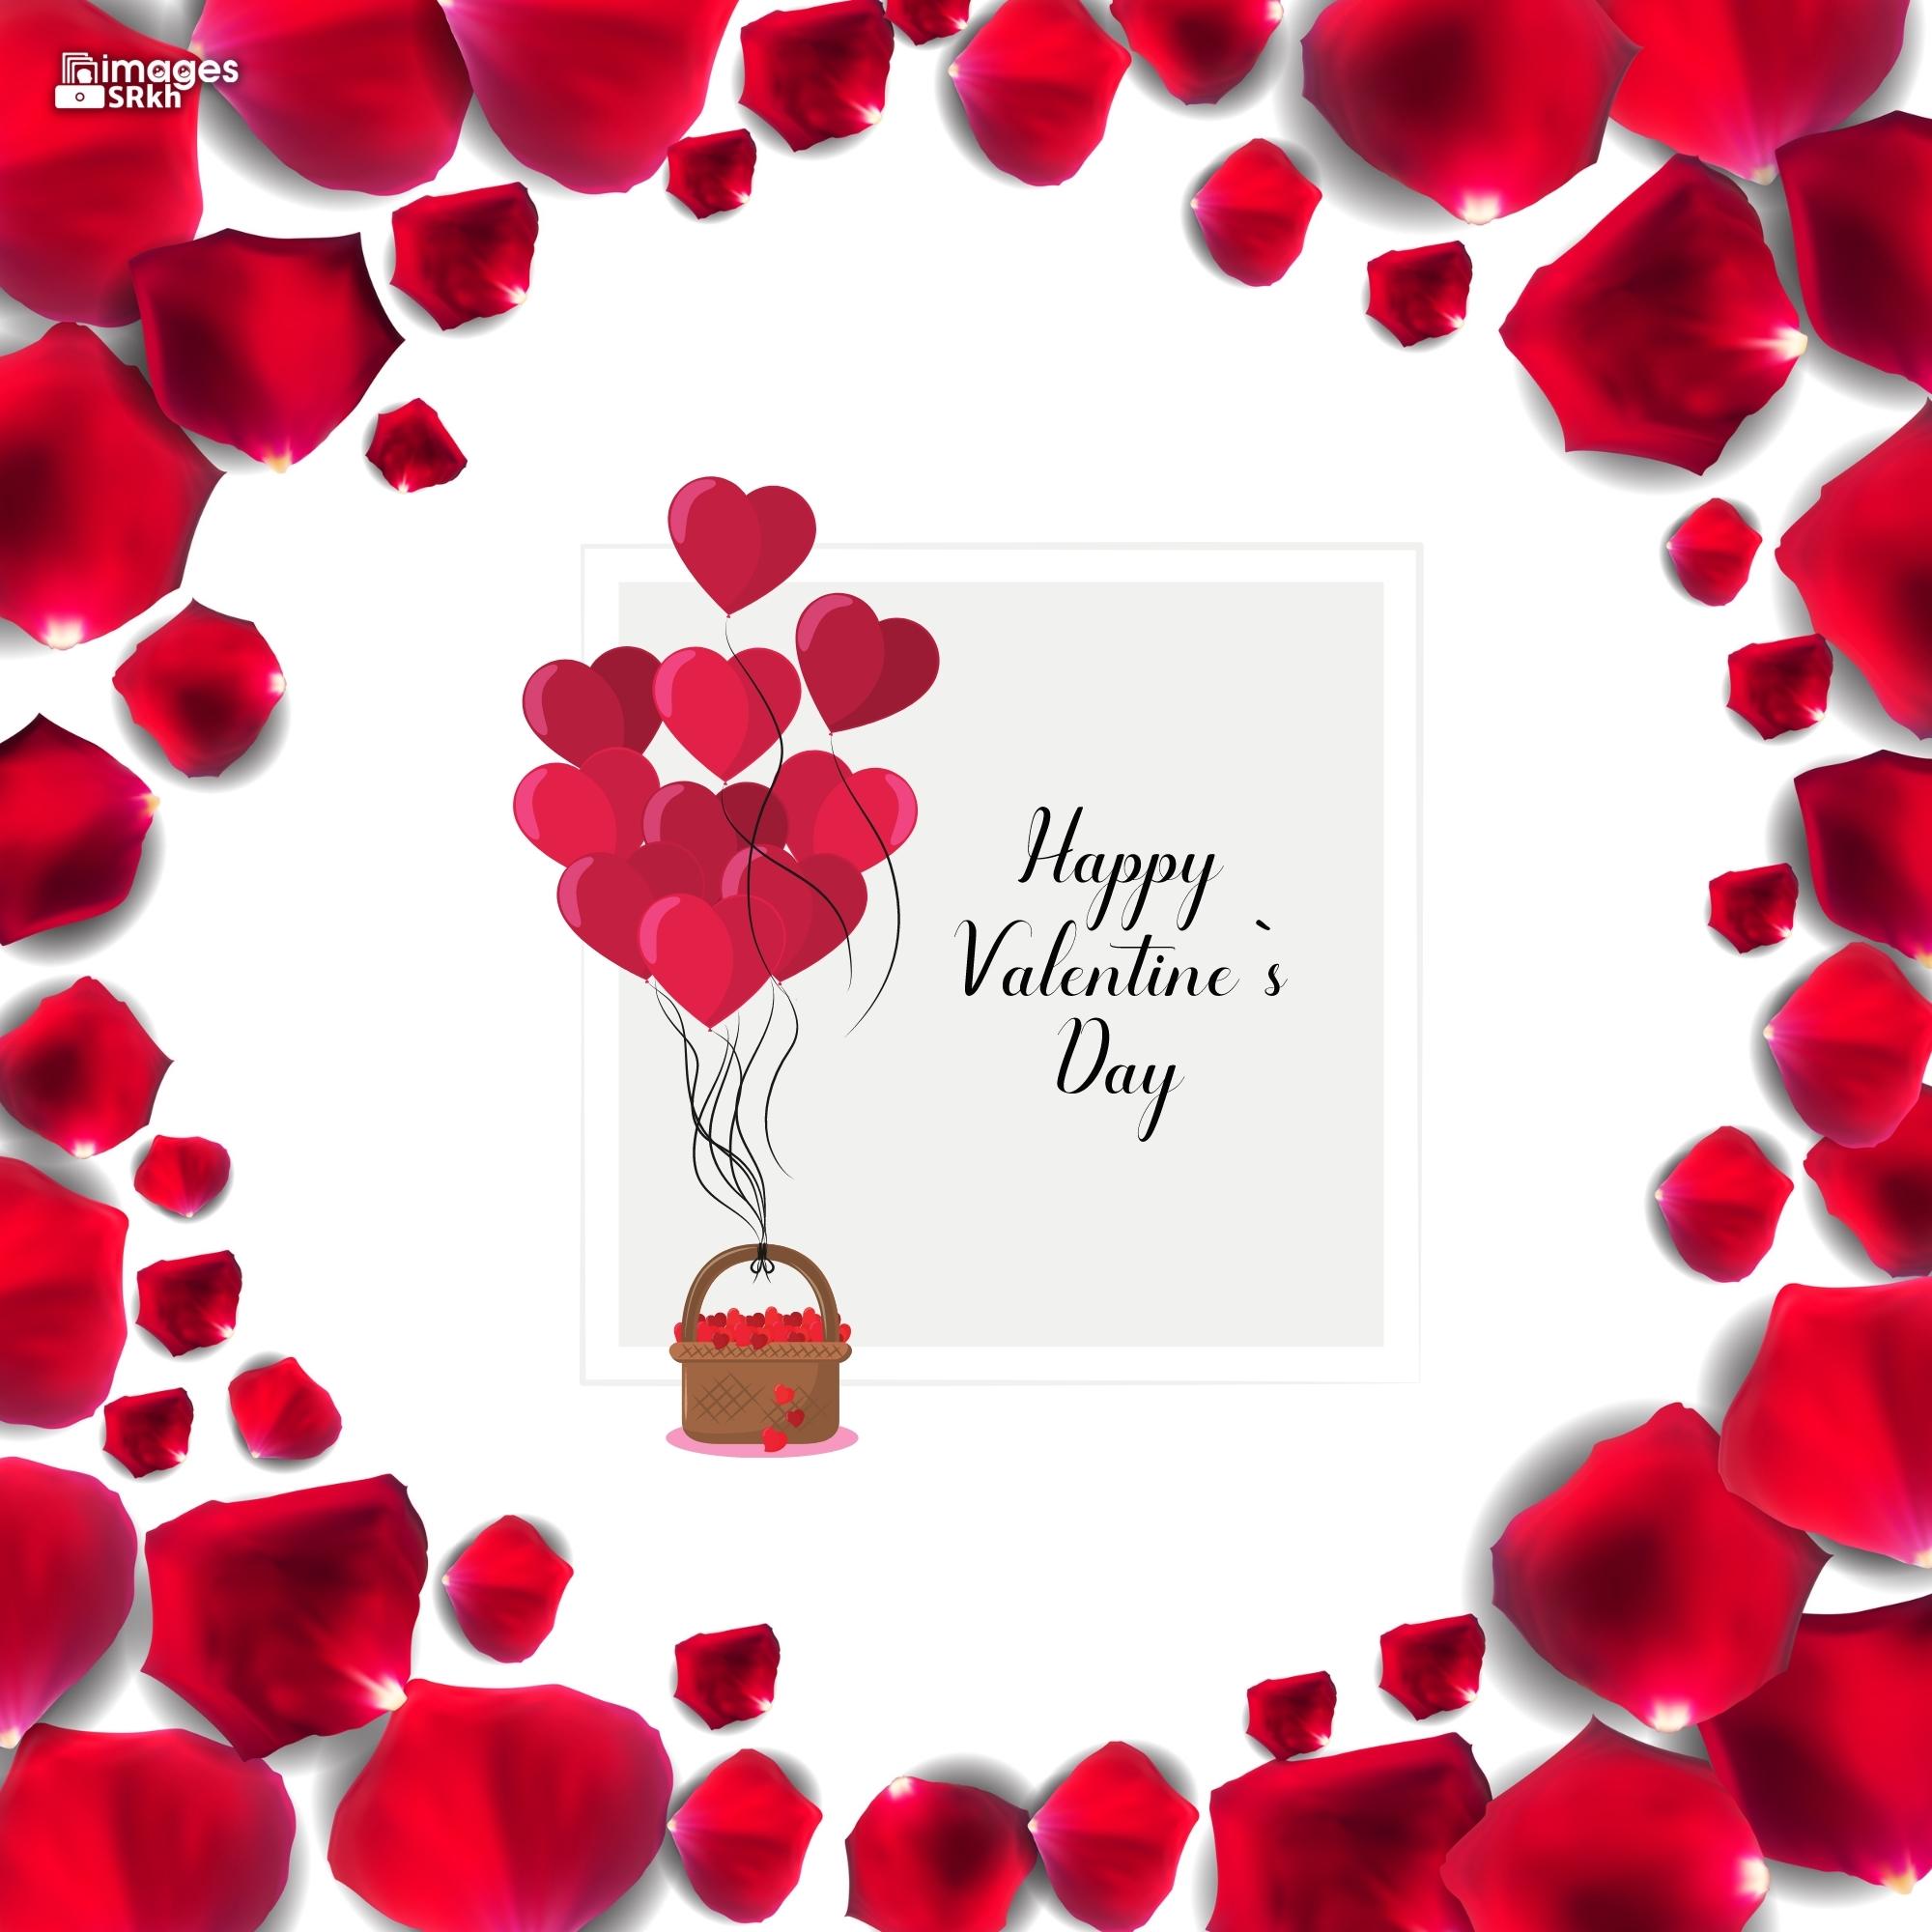 Happy Valentines Day | 466 | PREMIUM IMAGES | Wishes for Love